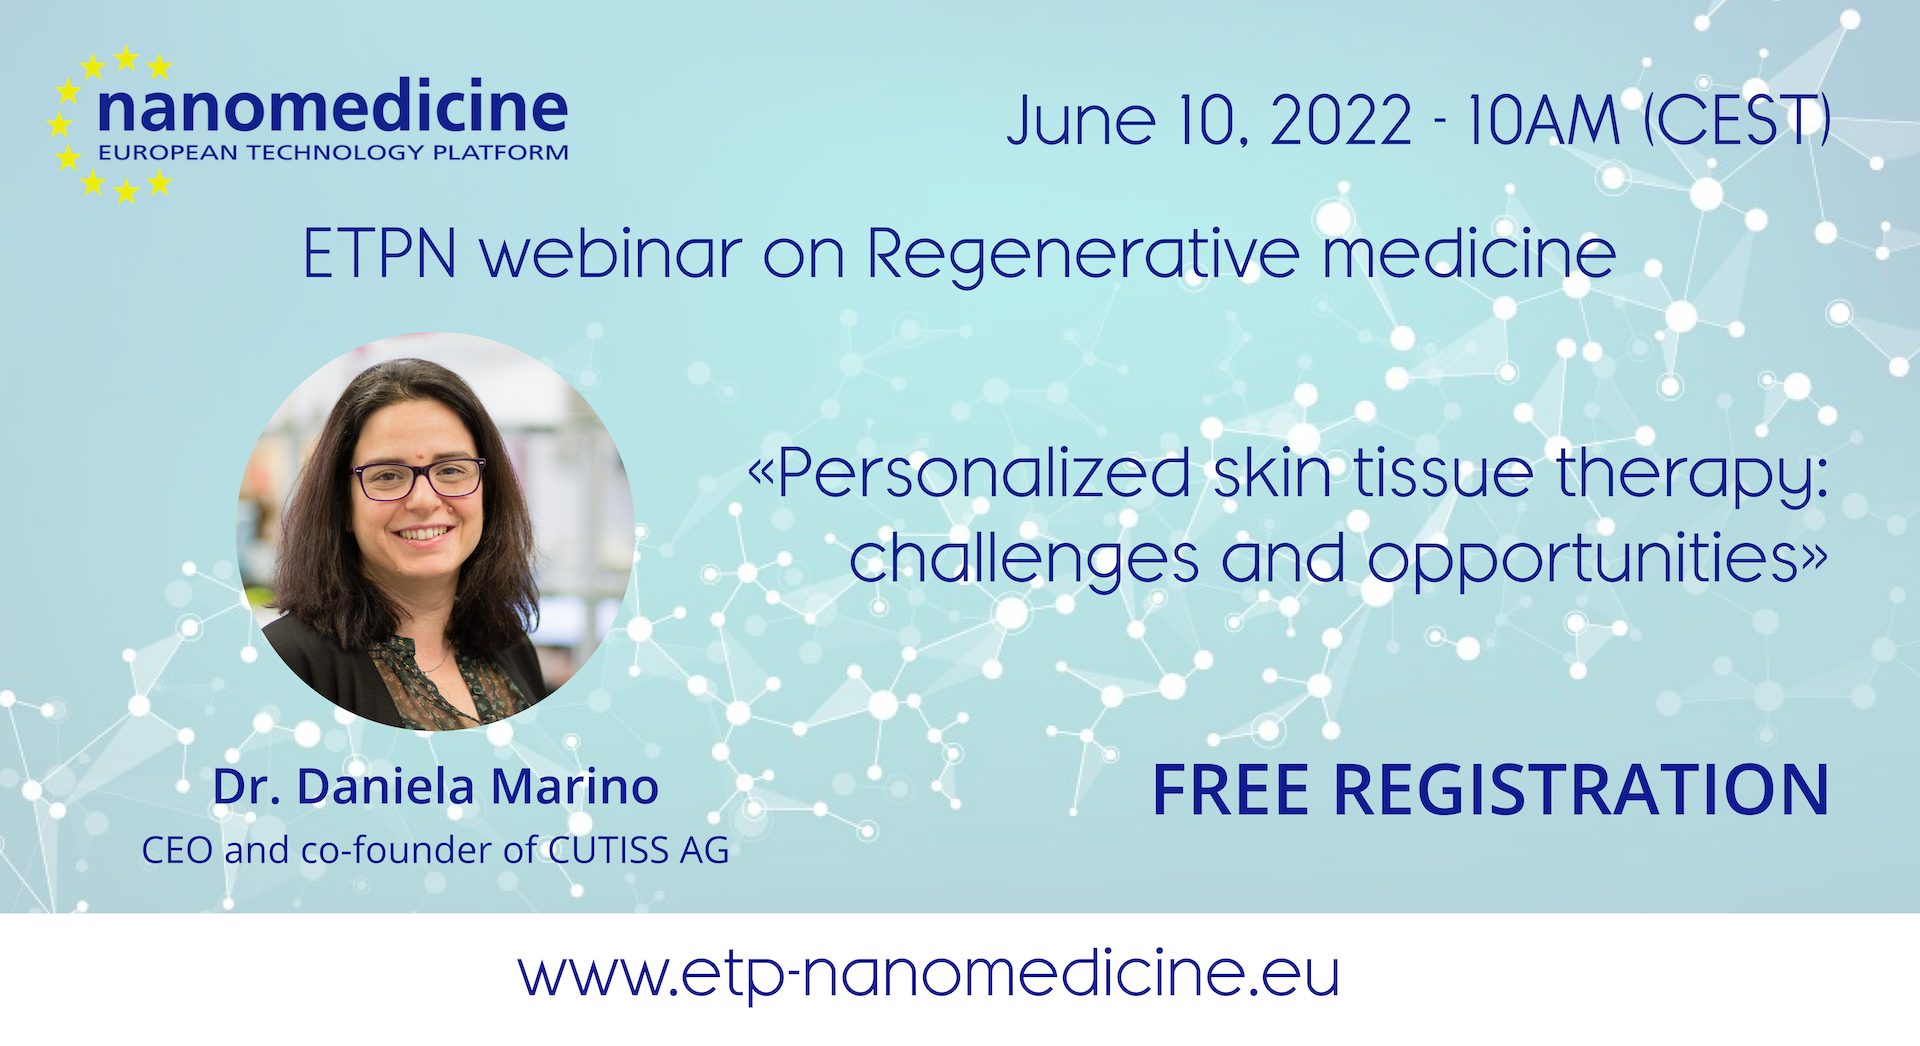 ETPN webinar on clinical regenerative medicine : “Personalized skin tissue therapy: challenges & opportunities”